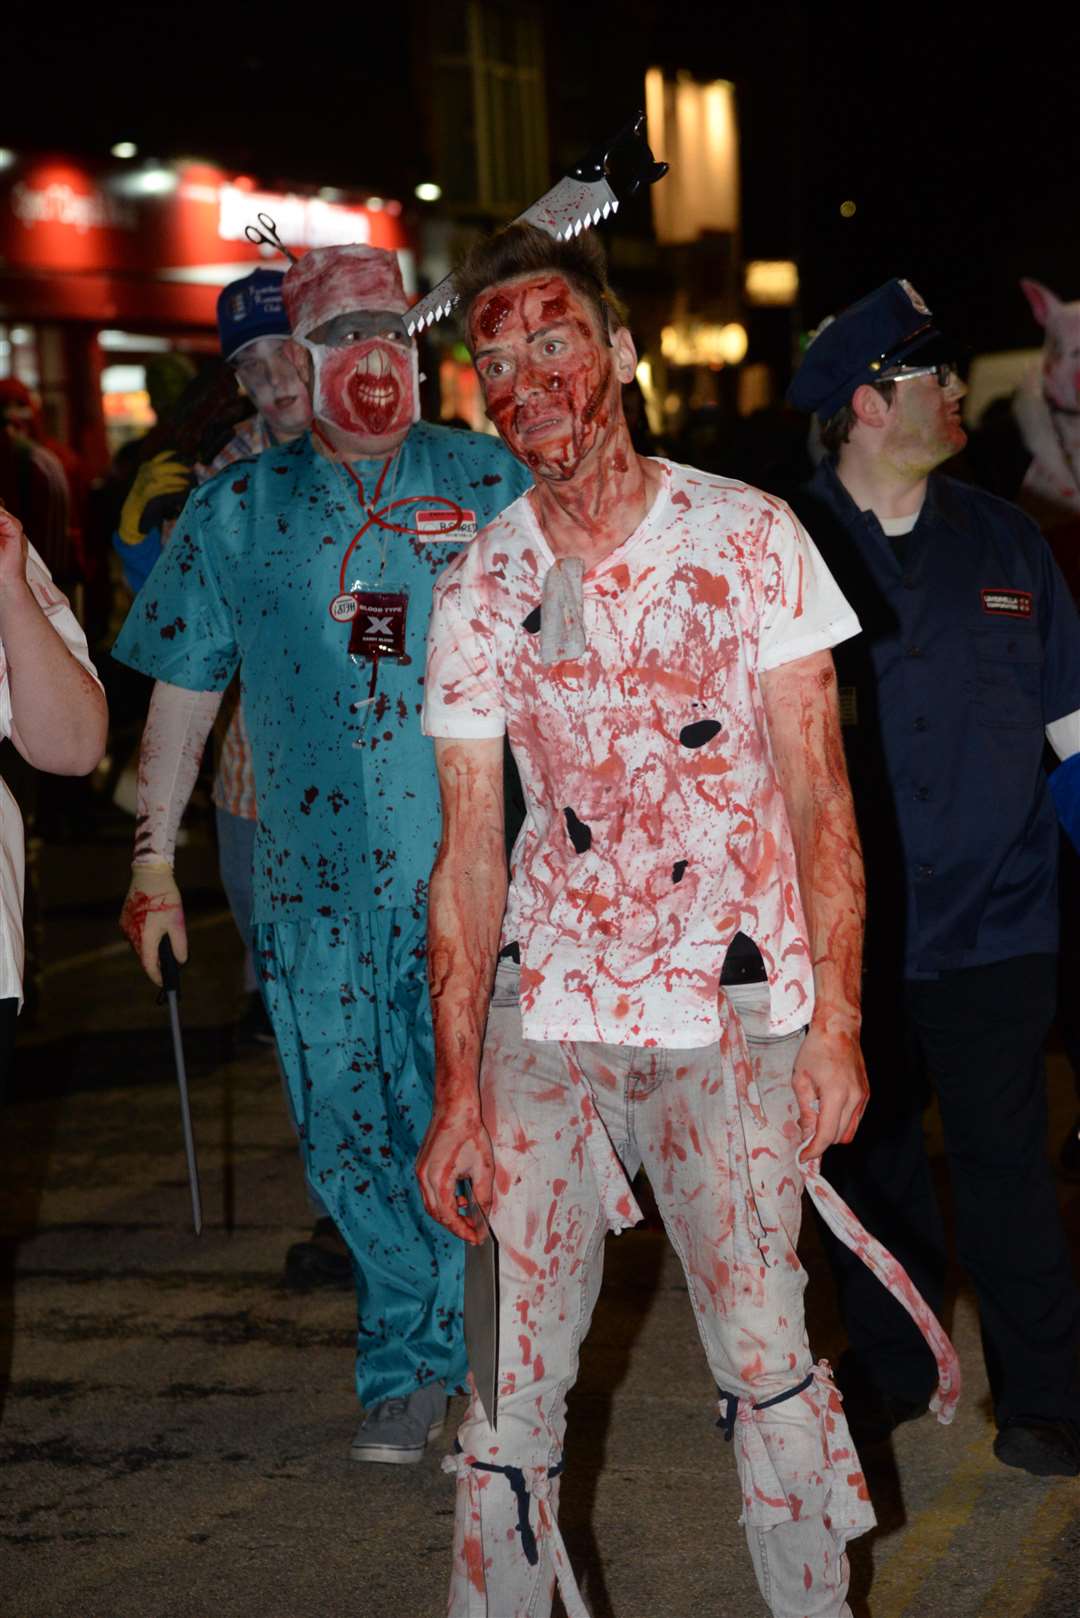 Many wore tattered clothes and were drenched in fake blood